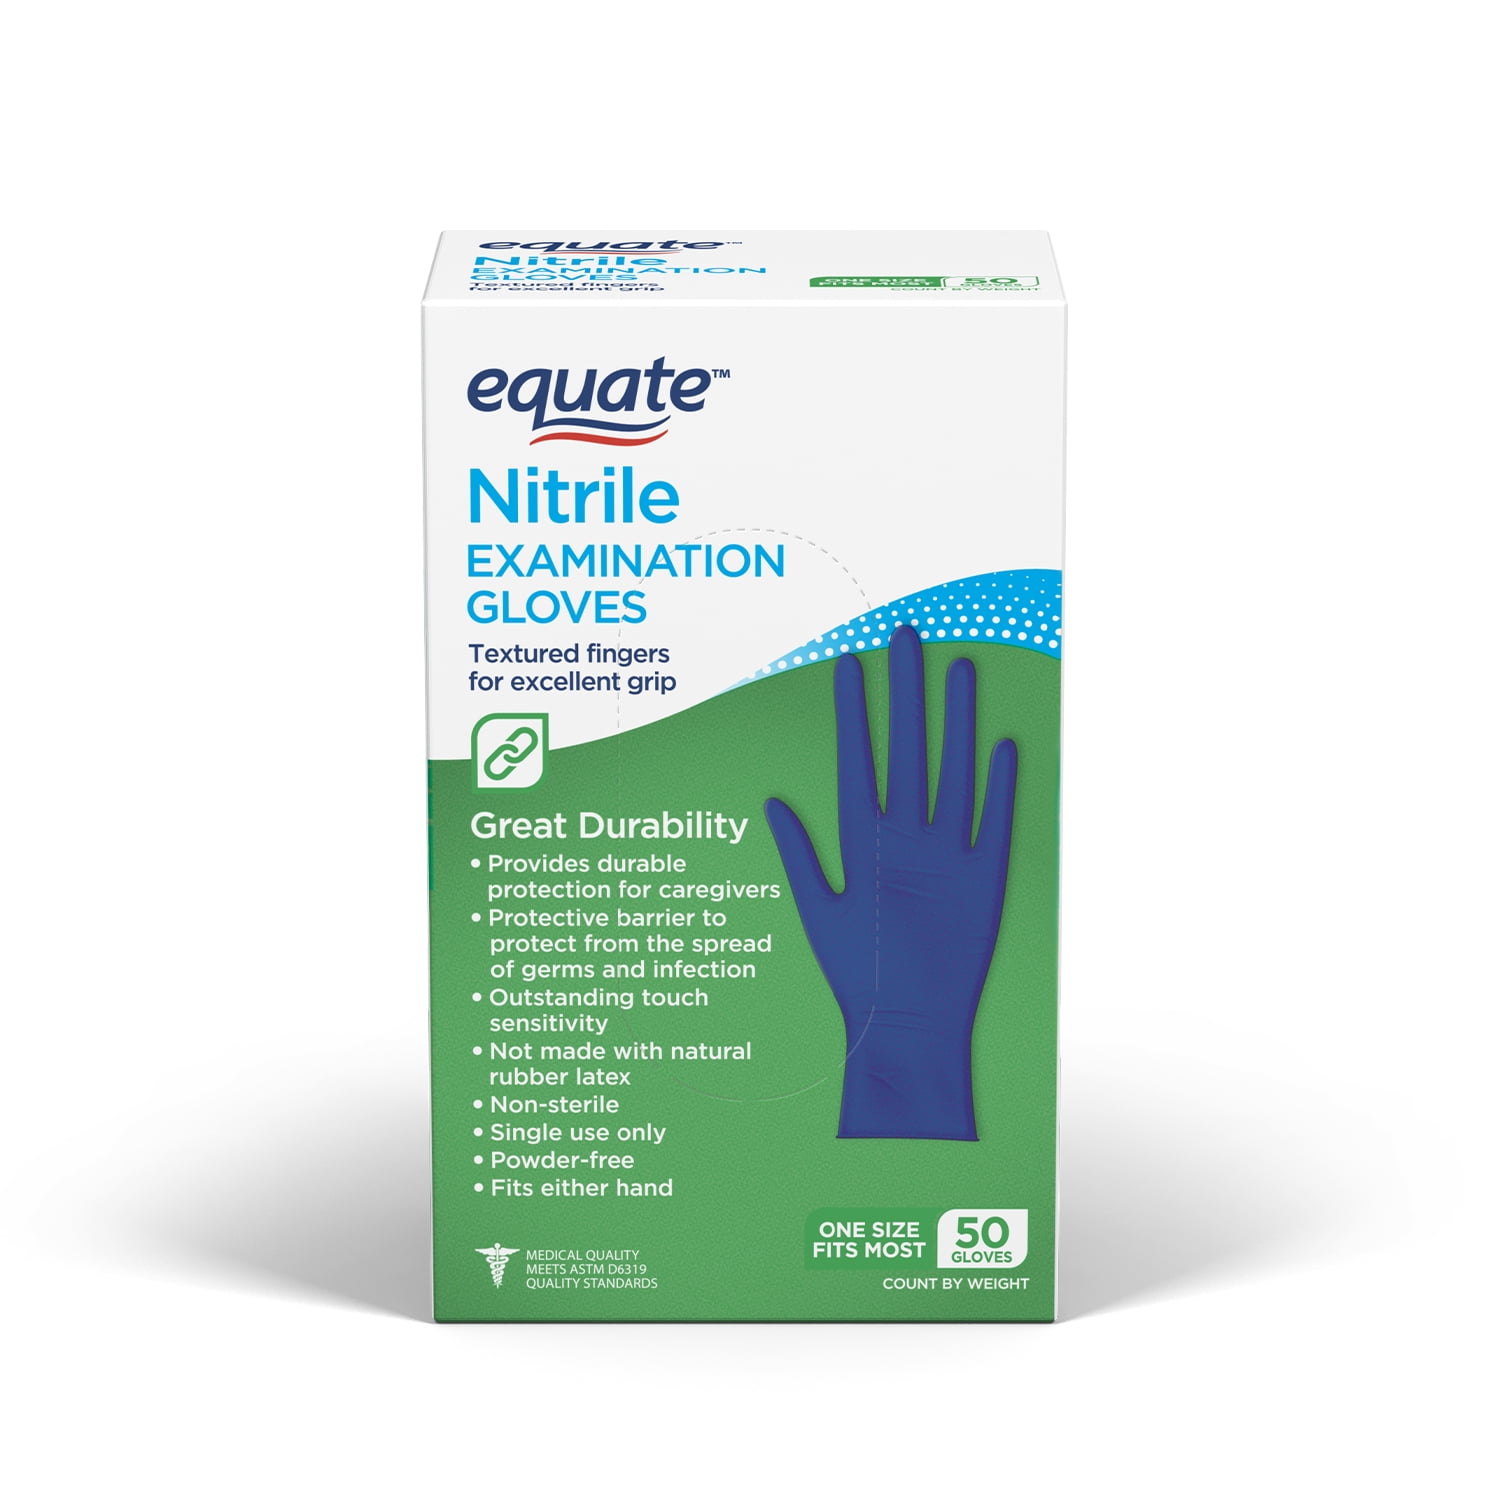 EQUATE NITRILE EXAM GLOVES, ONE SIZE FITS MOST, 50 COUNT